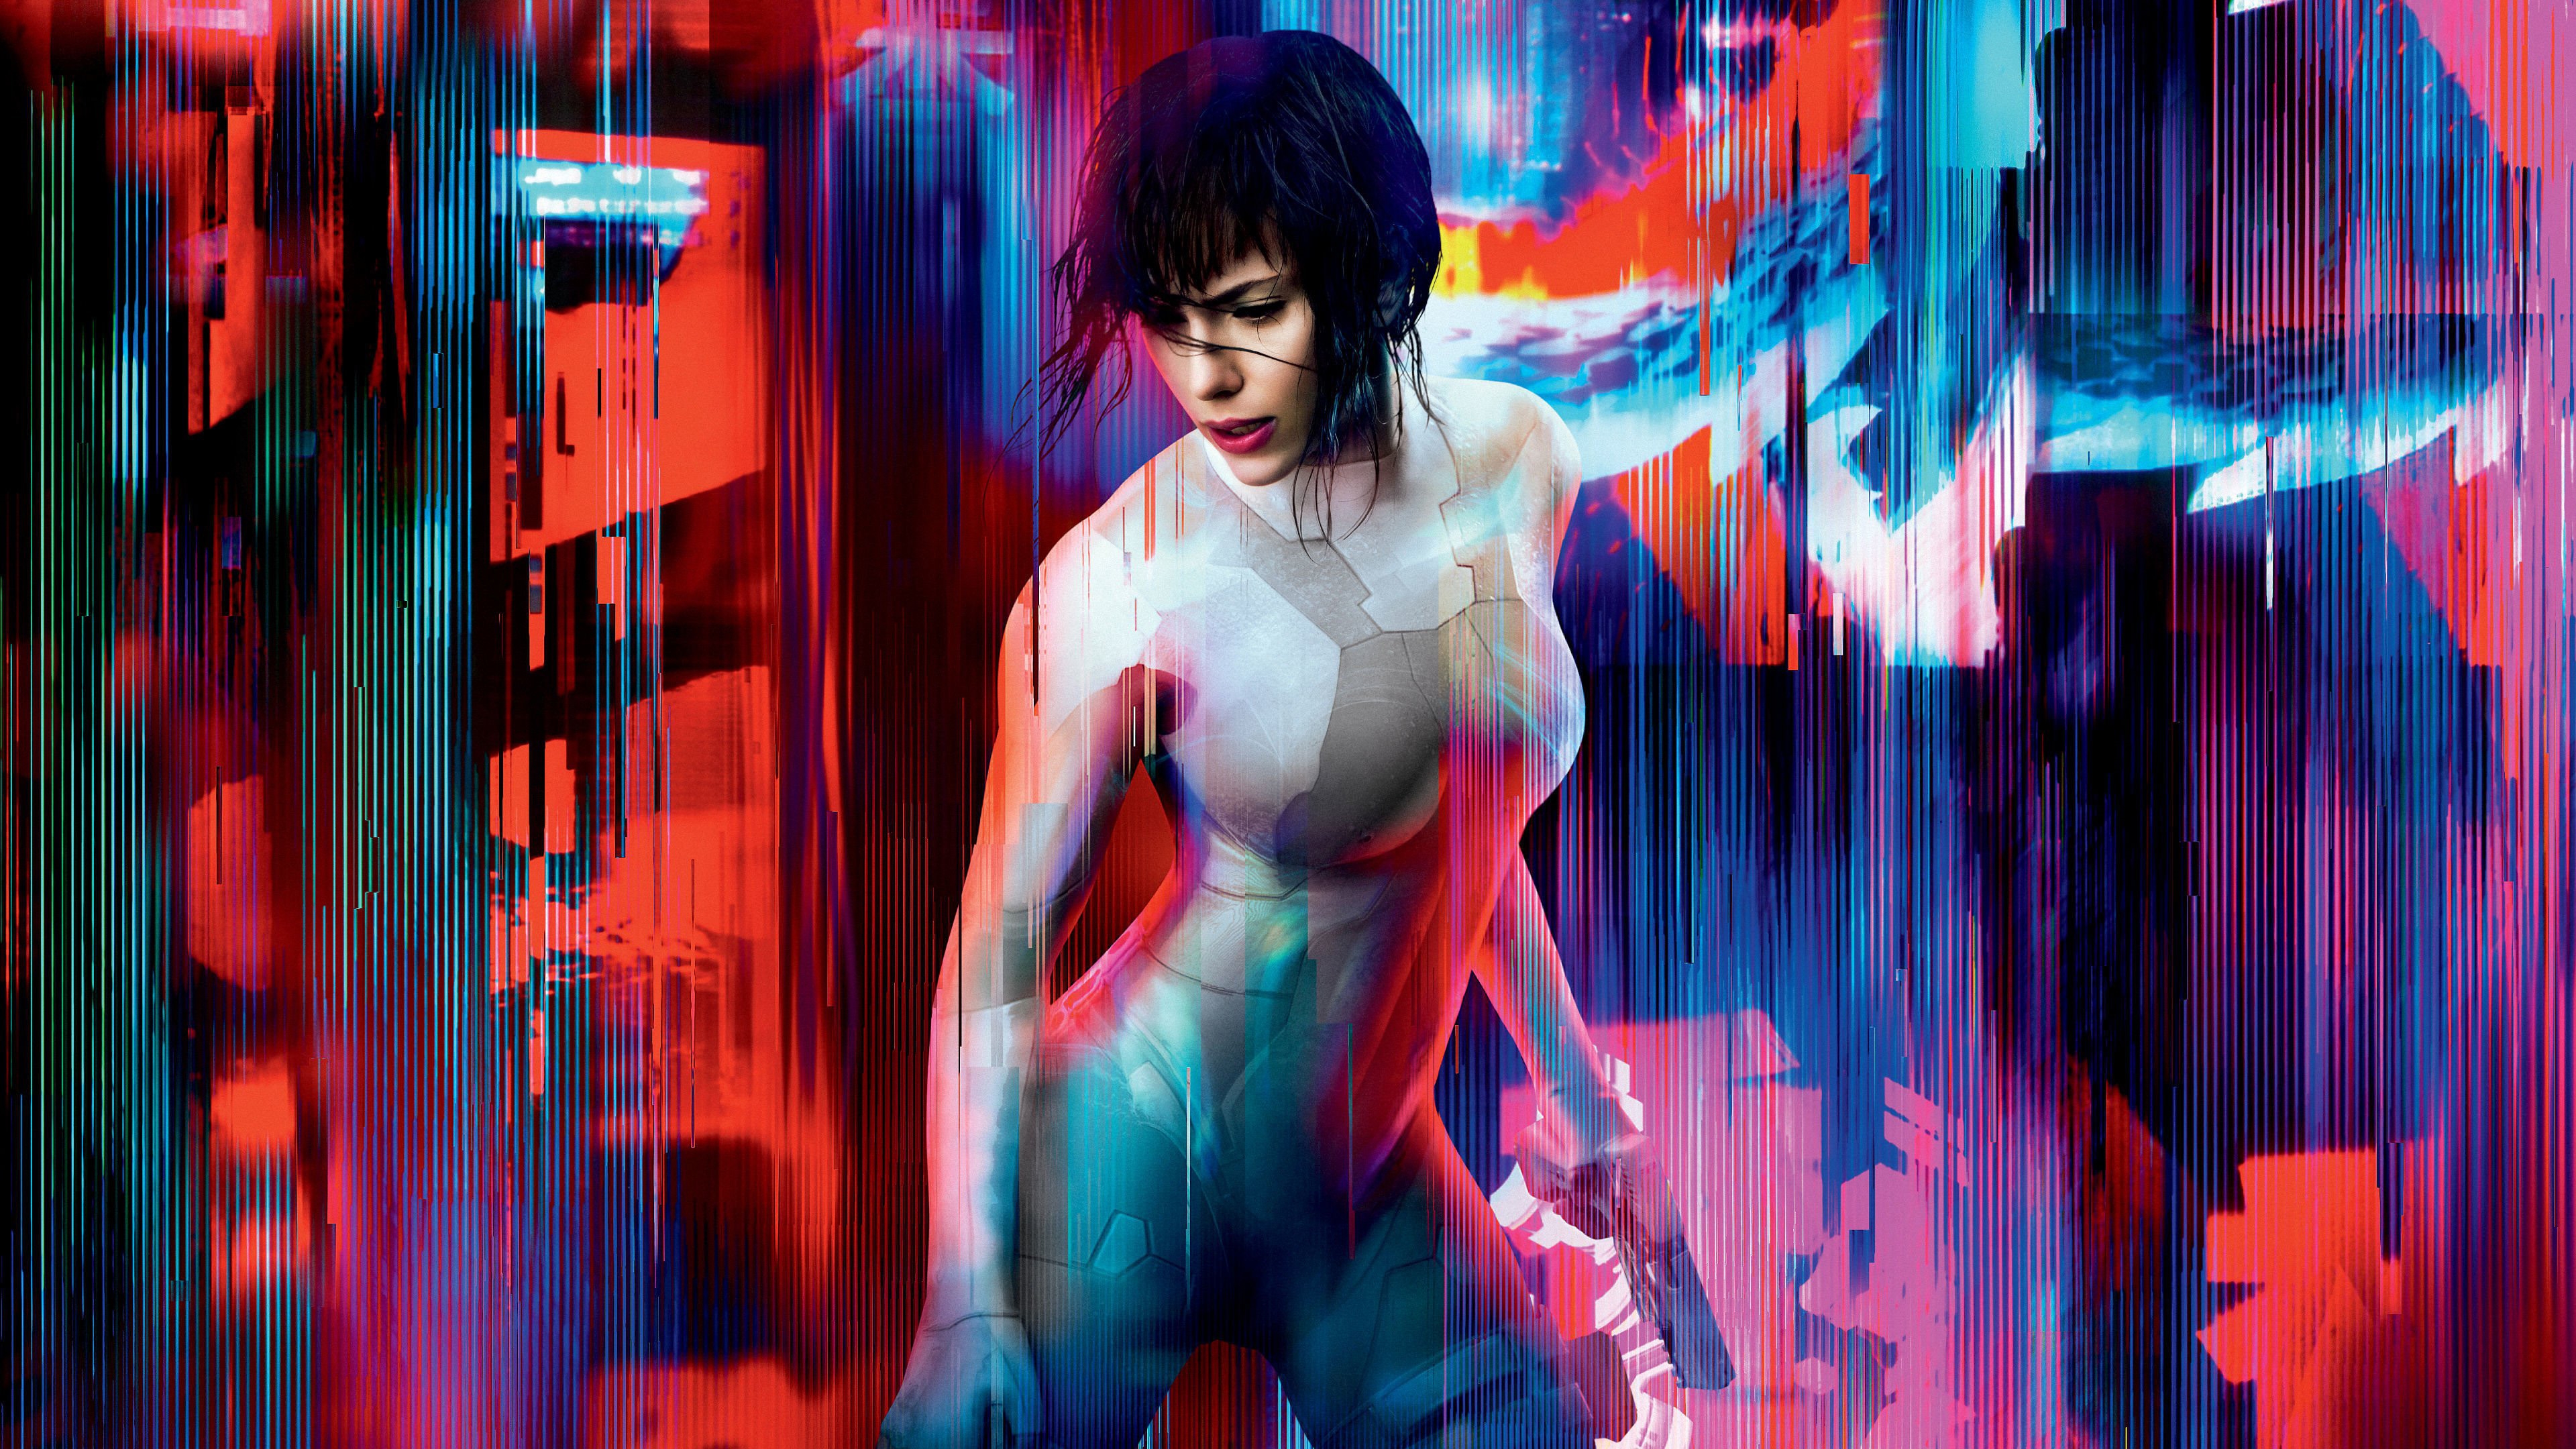 Image du film Ghost in the Shell 9c43517b-bbb5-4e6c-bb90-008886d7d329